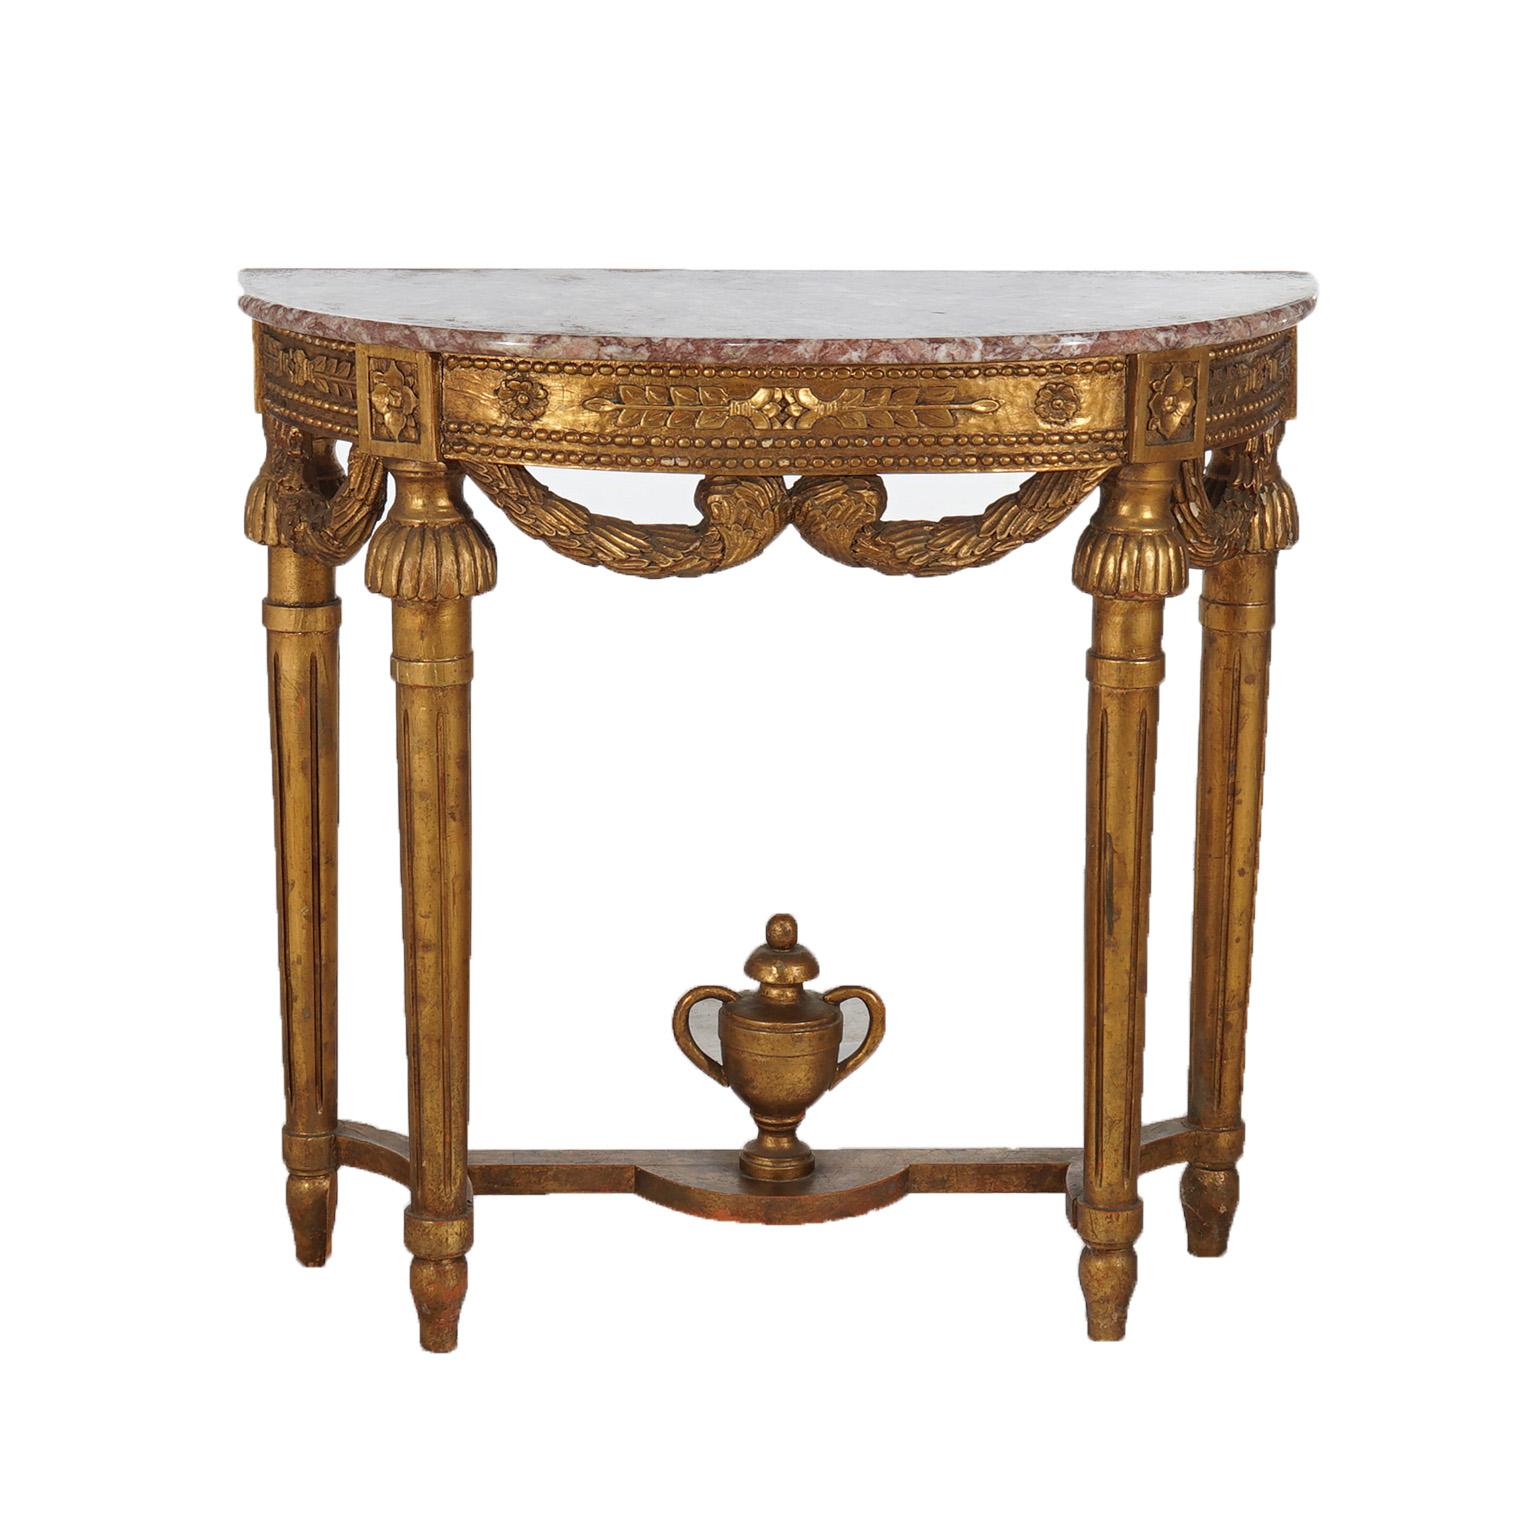 French Louis XVI Style Carved Giltwood & Marble Demilune Console Table with Garland Skirt, Tapered Legs & Urn Finial Stretcher, 20thC

Measures - 30.25